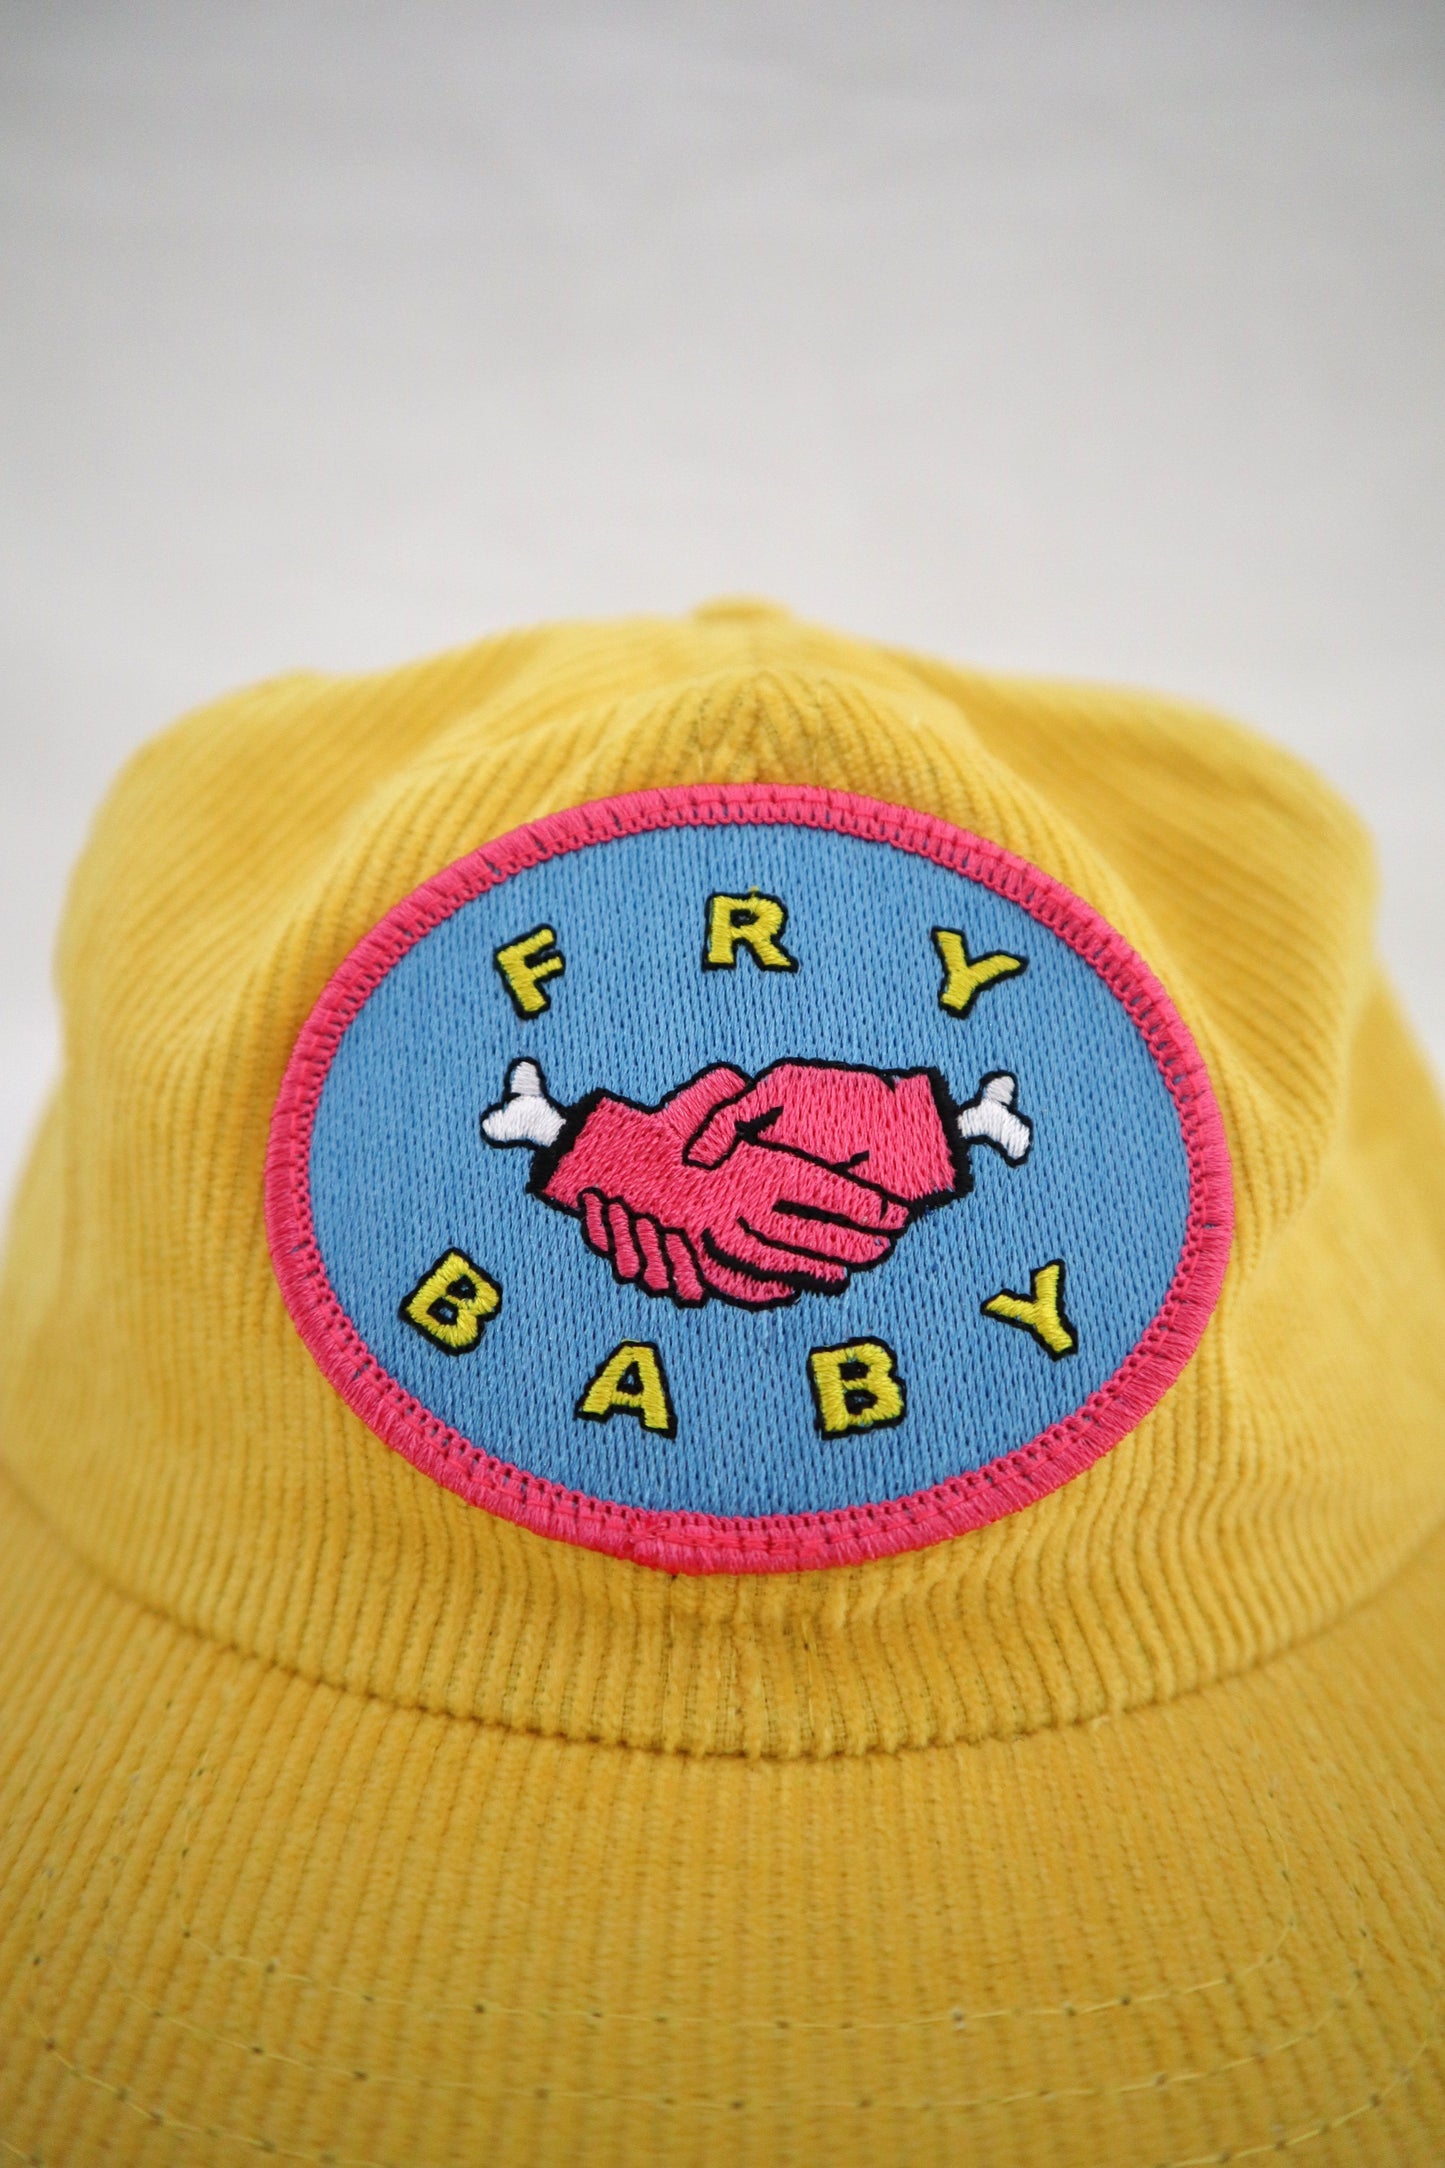 The Fry Baby by Fry Baby